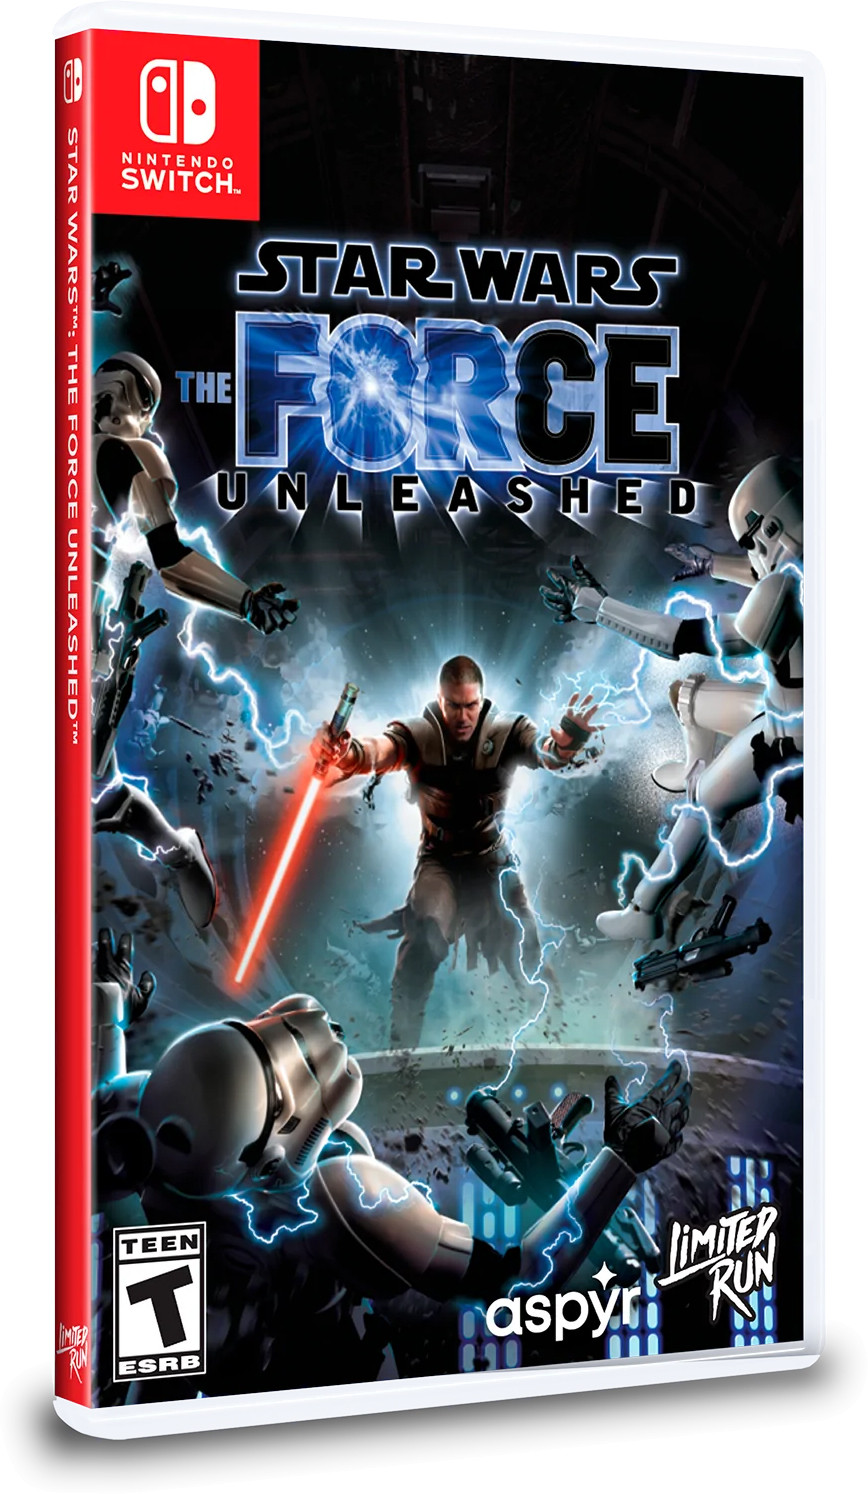 Star Wars The Force Unleashed (Limited Run Games) - Nintendo Switch